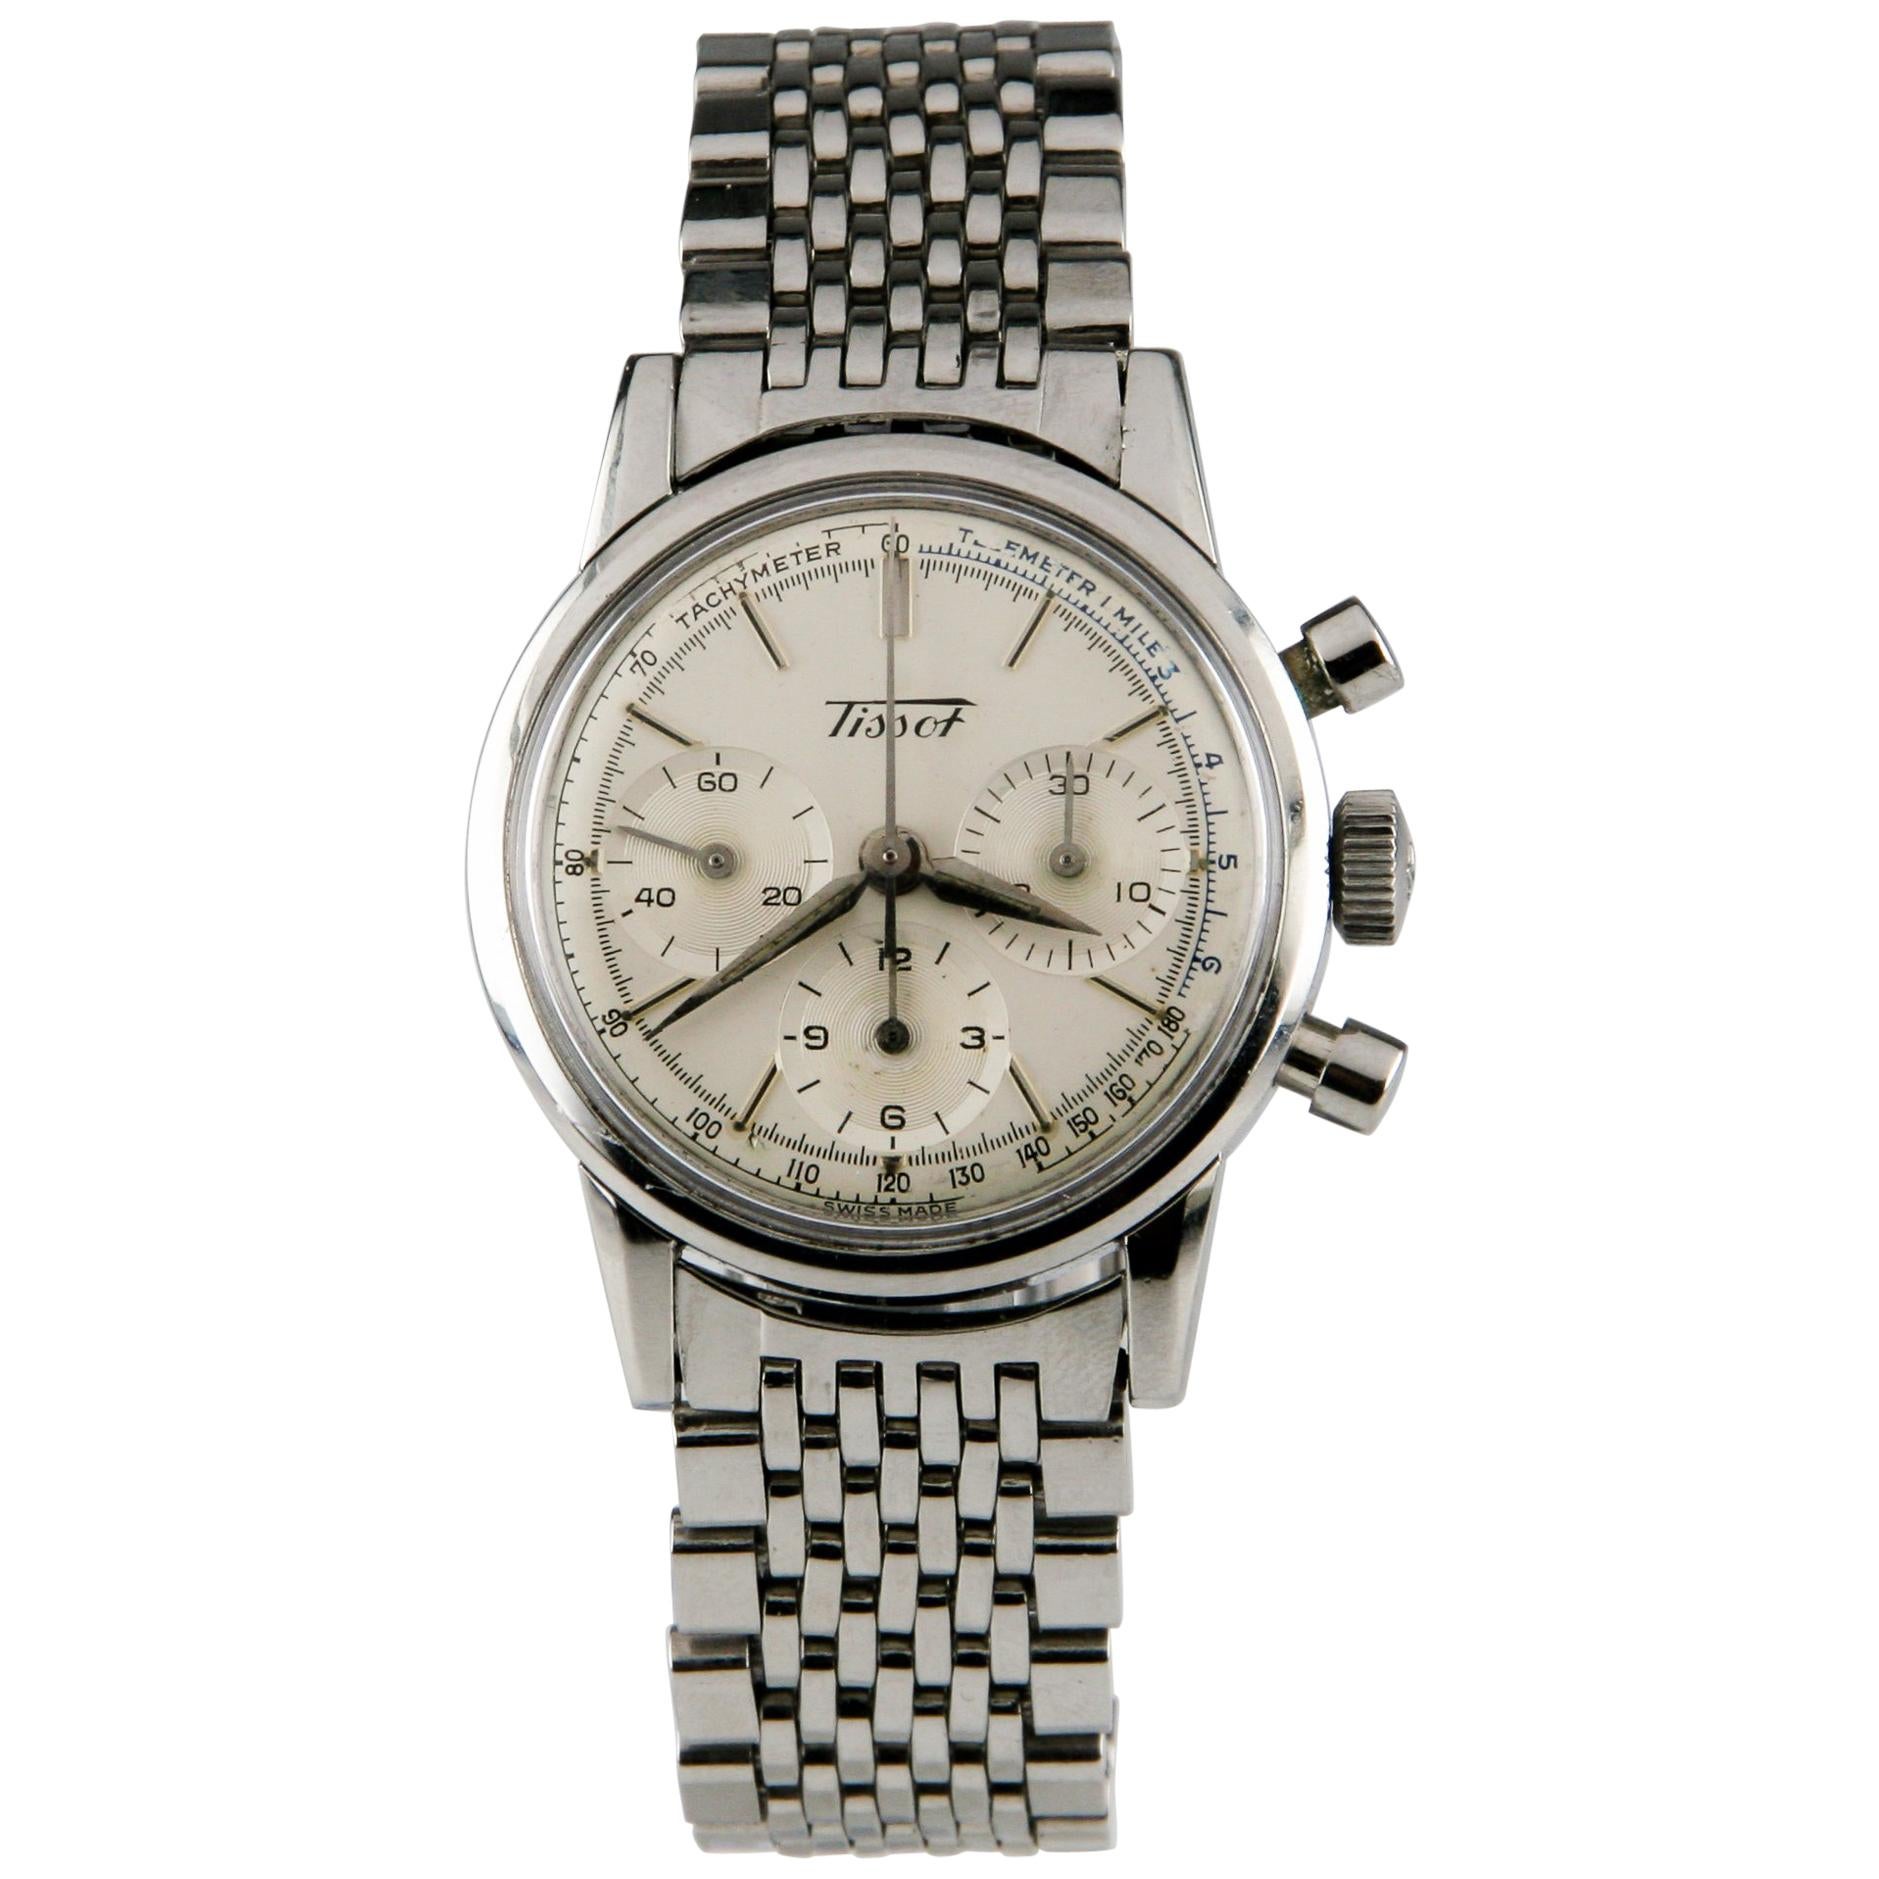 Tissot Chronograph MVMT 1281 Vintage Stainless Steel Men's Watch with Subdials